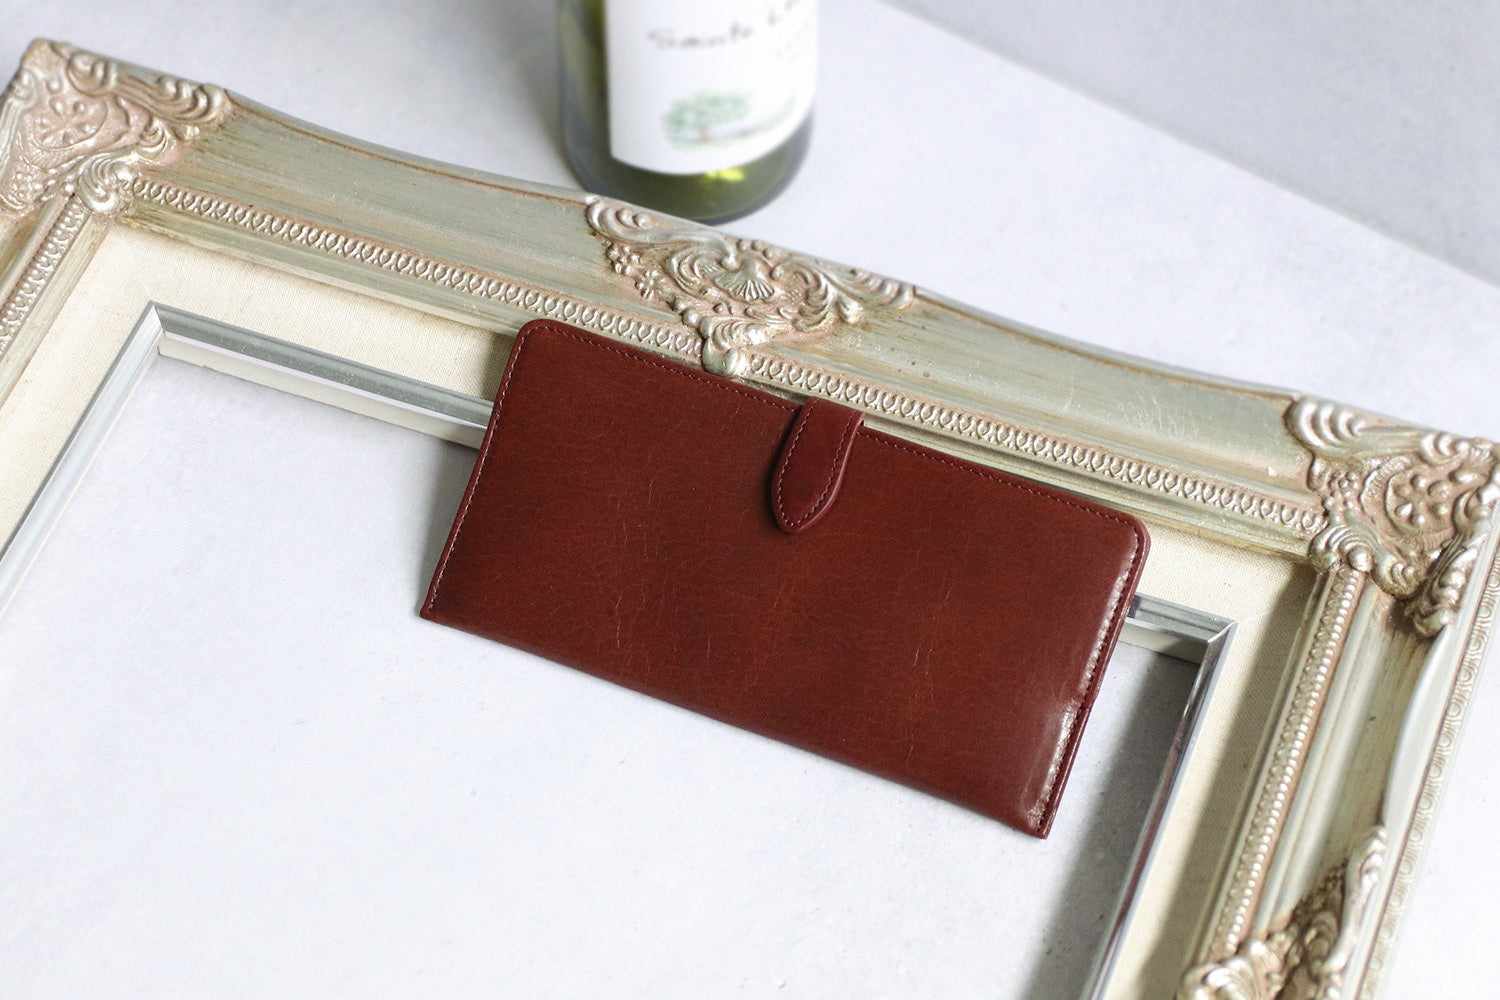 Atelier nuu / Lezza botanica vino Smart long wallet made of sustainable leather dyed with wine residue 